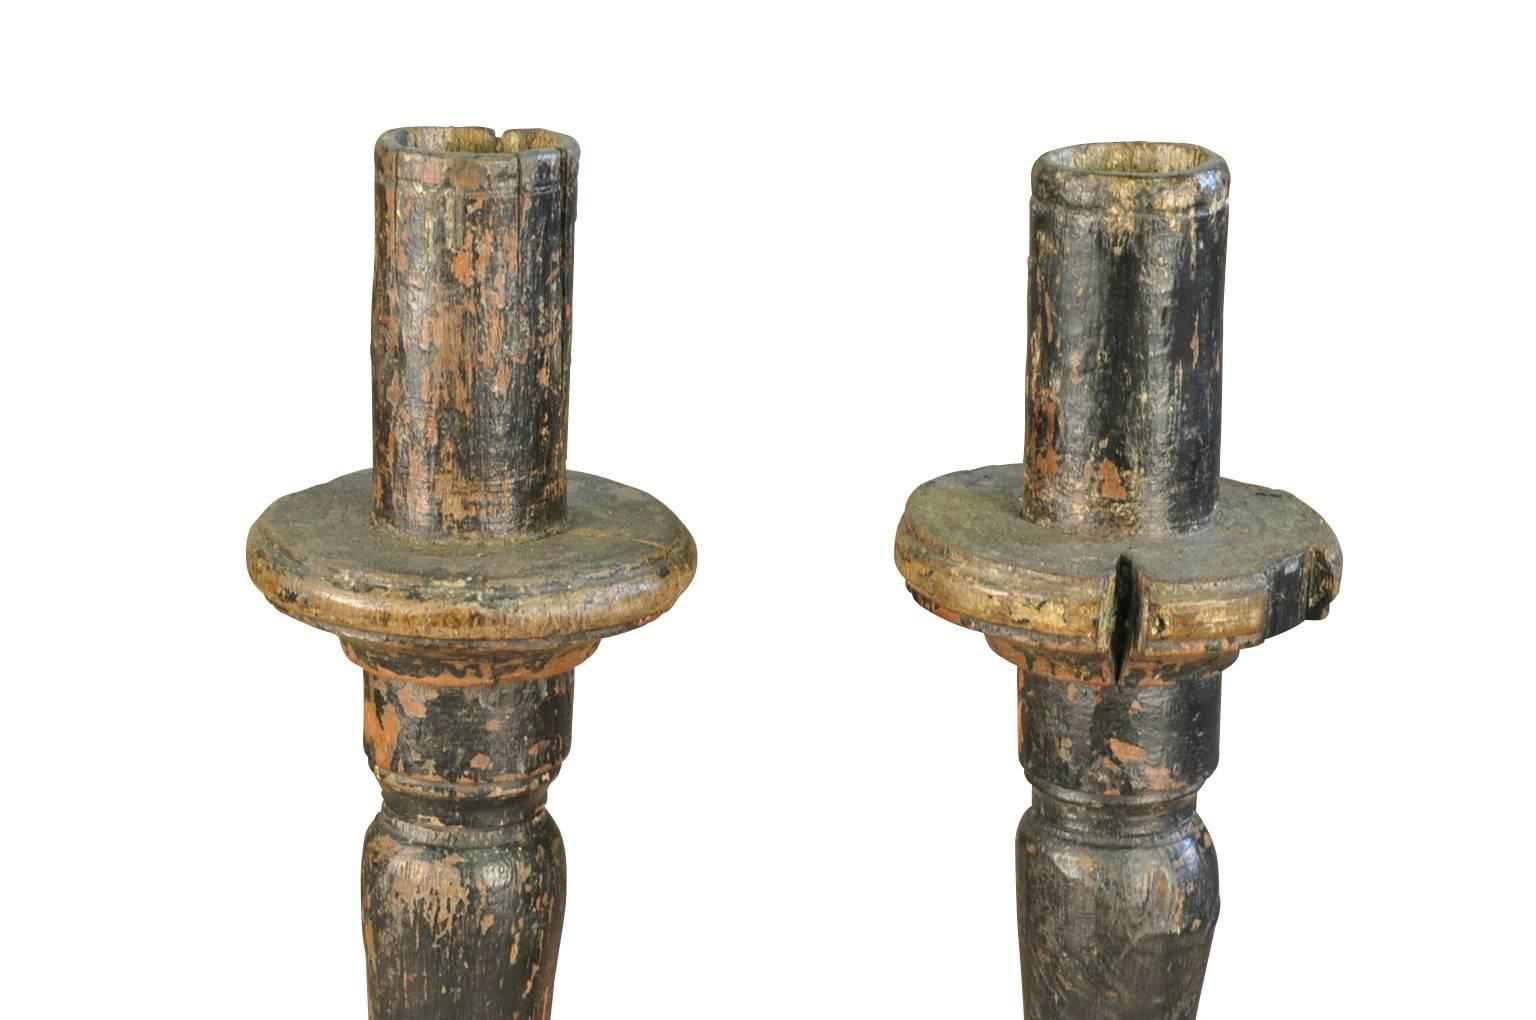 A wonderful pair of 17th century large altar sticks from the Catalan region of Spain. Handsomely constructed from painted wood with a nicely turned shaft on tripod feet. Terrific patina.